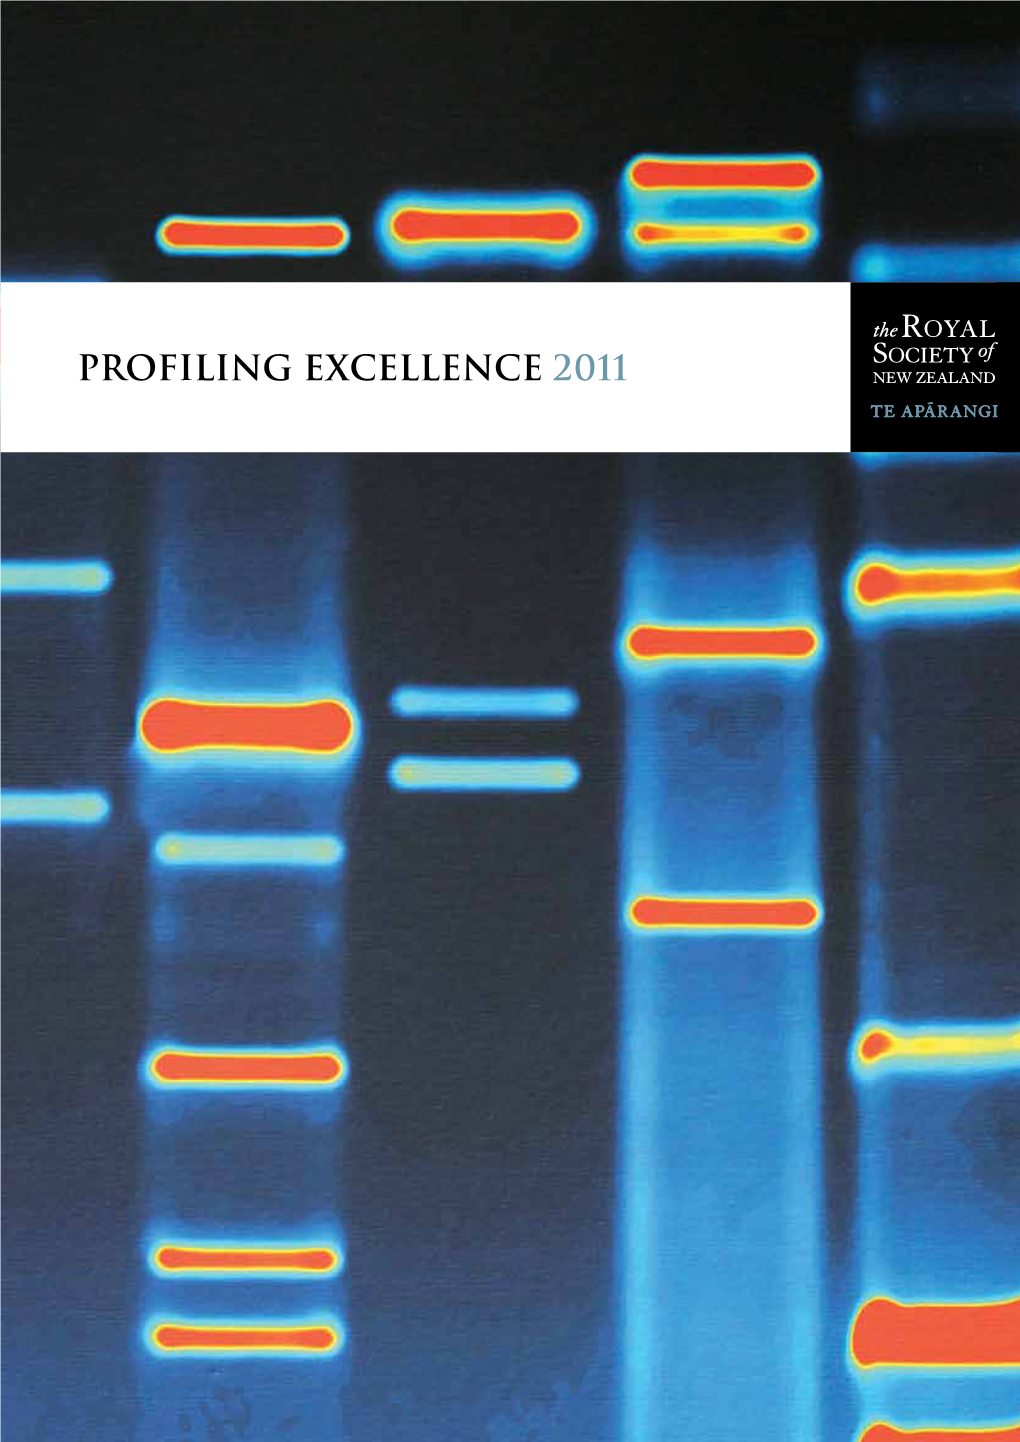 Profiling Excellence 2011 2 ROYAL SOCIETY of NEW ZEALAND | HIGHLIGHTS of 2011